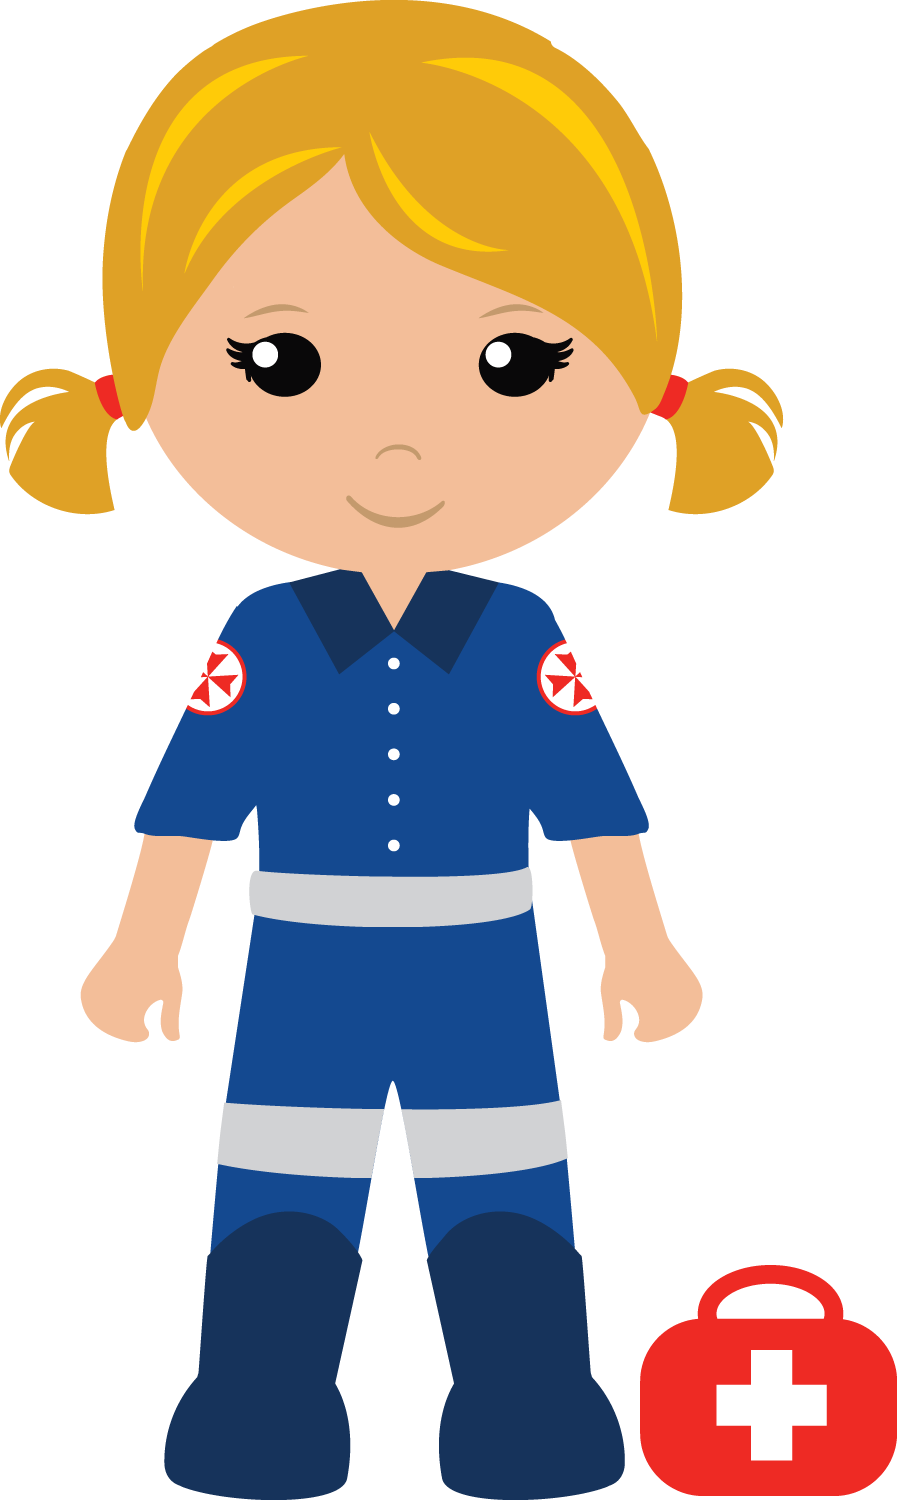 First Aid Supplies Child Paramedic Cardiopulmonary - Portable Network Graphics (897x1500)